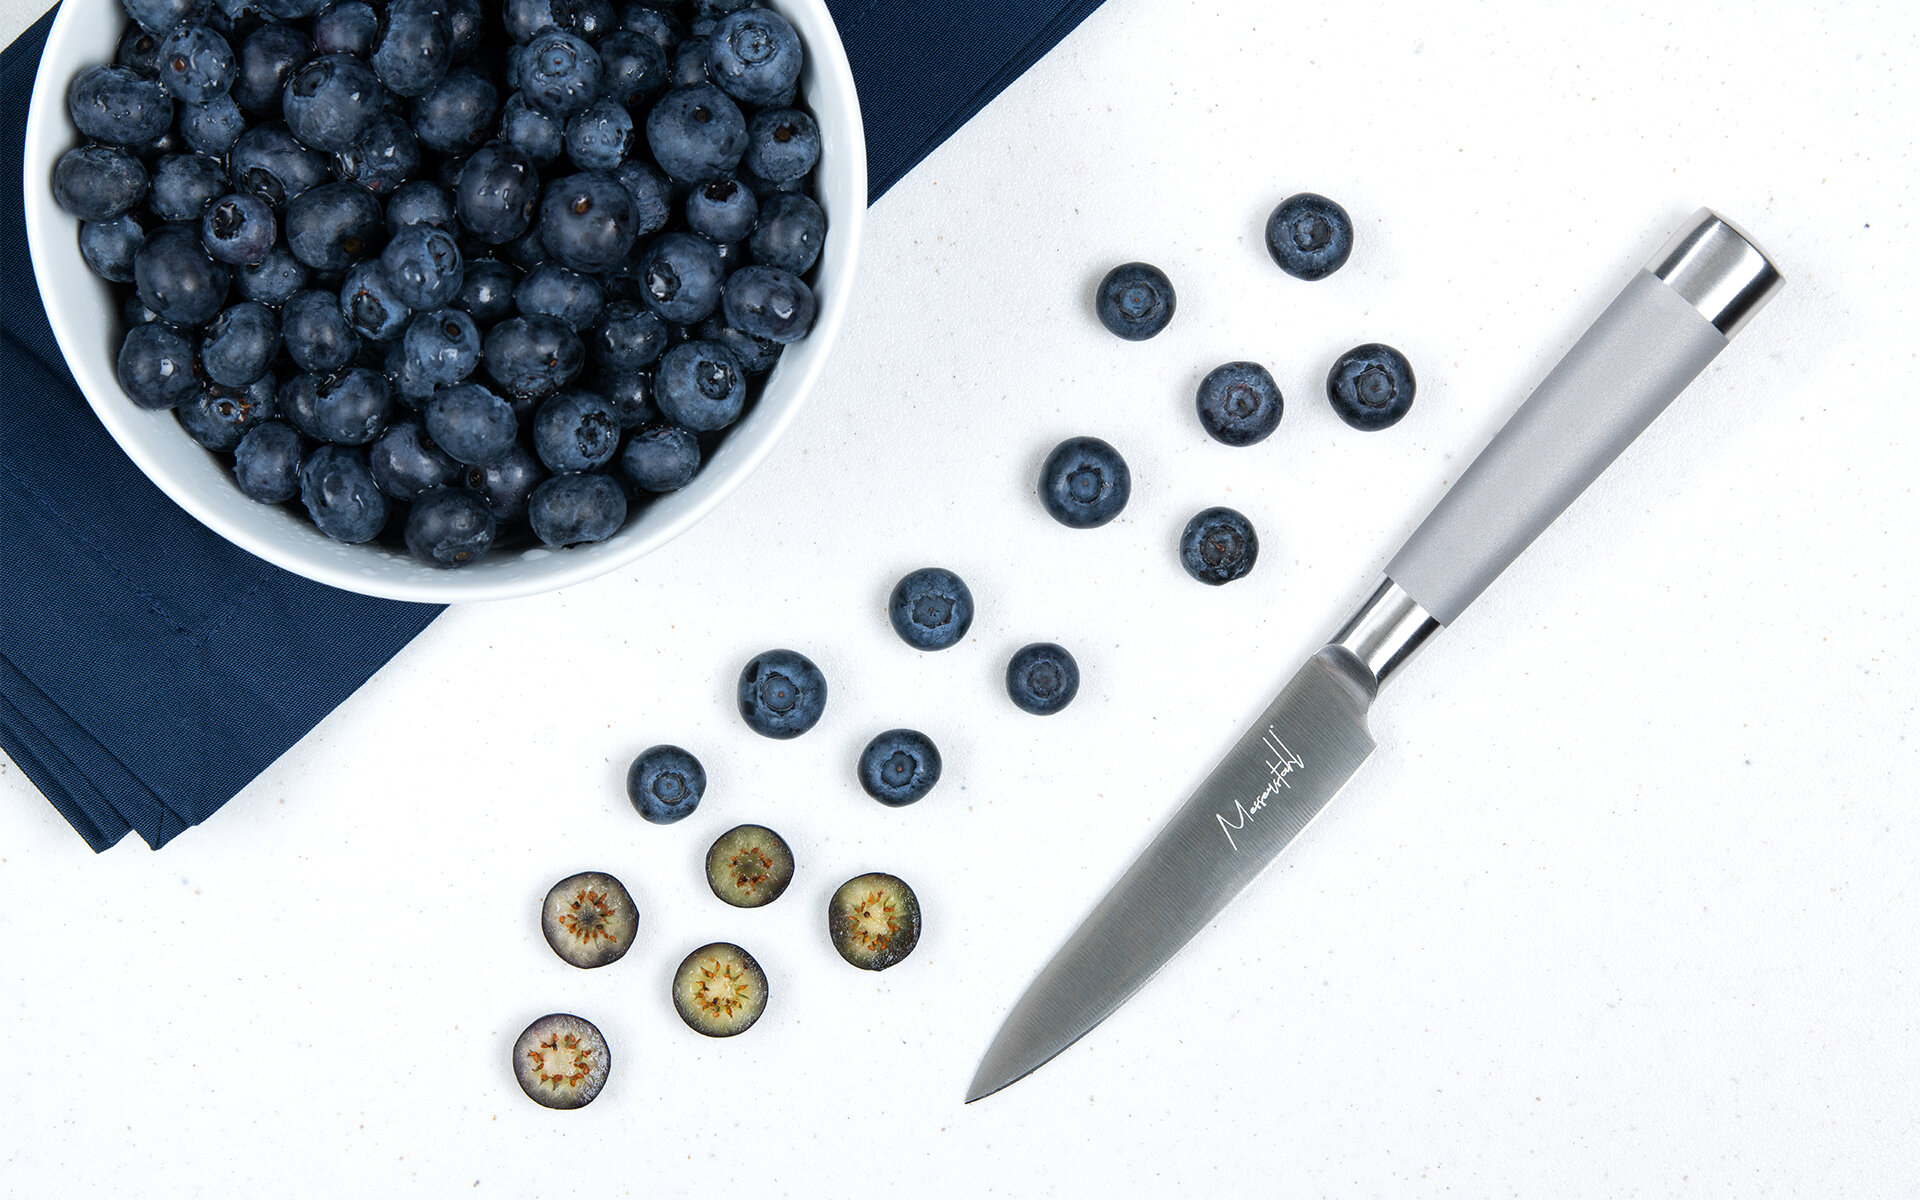 Kitchen Shears — Messerstahl 2.0 – Knives that look sharp too.